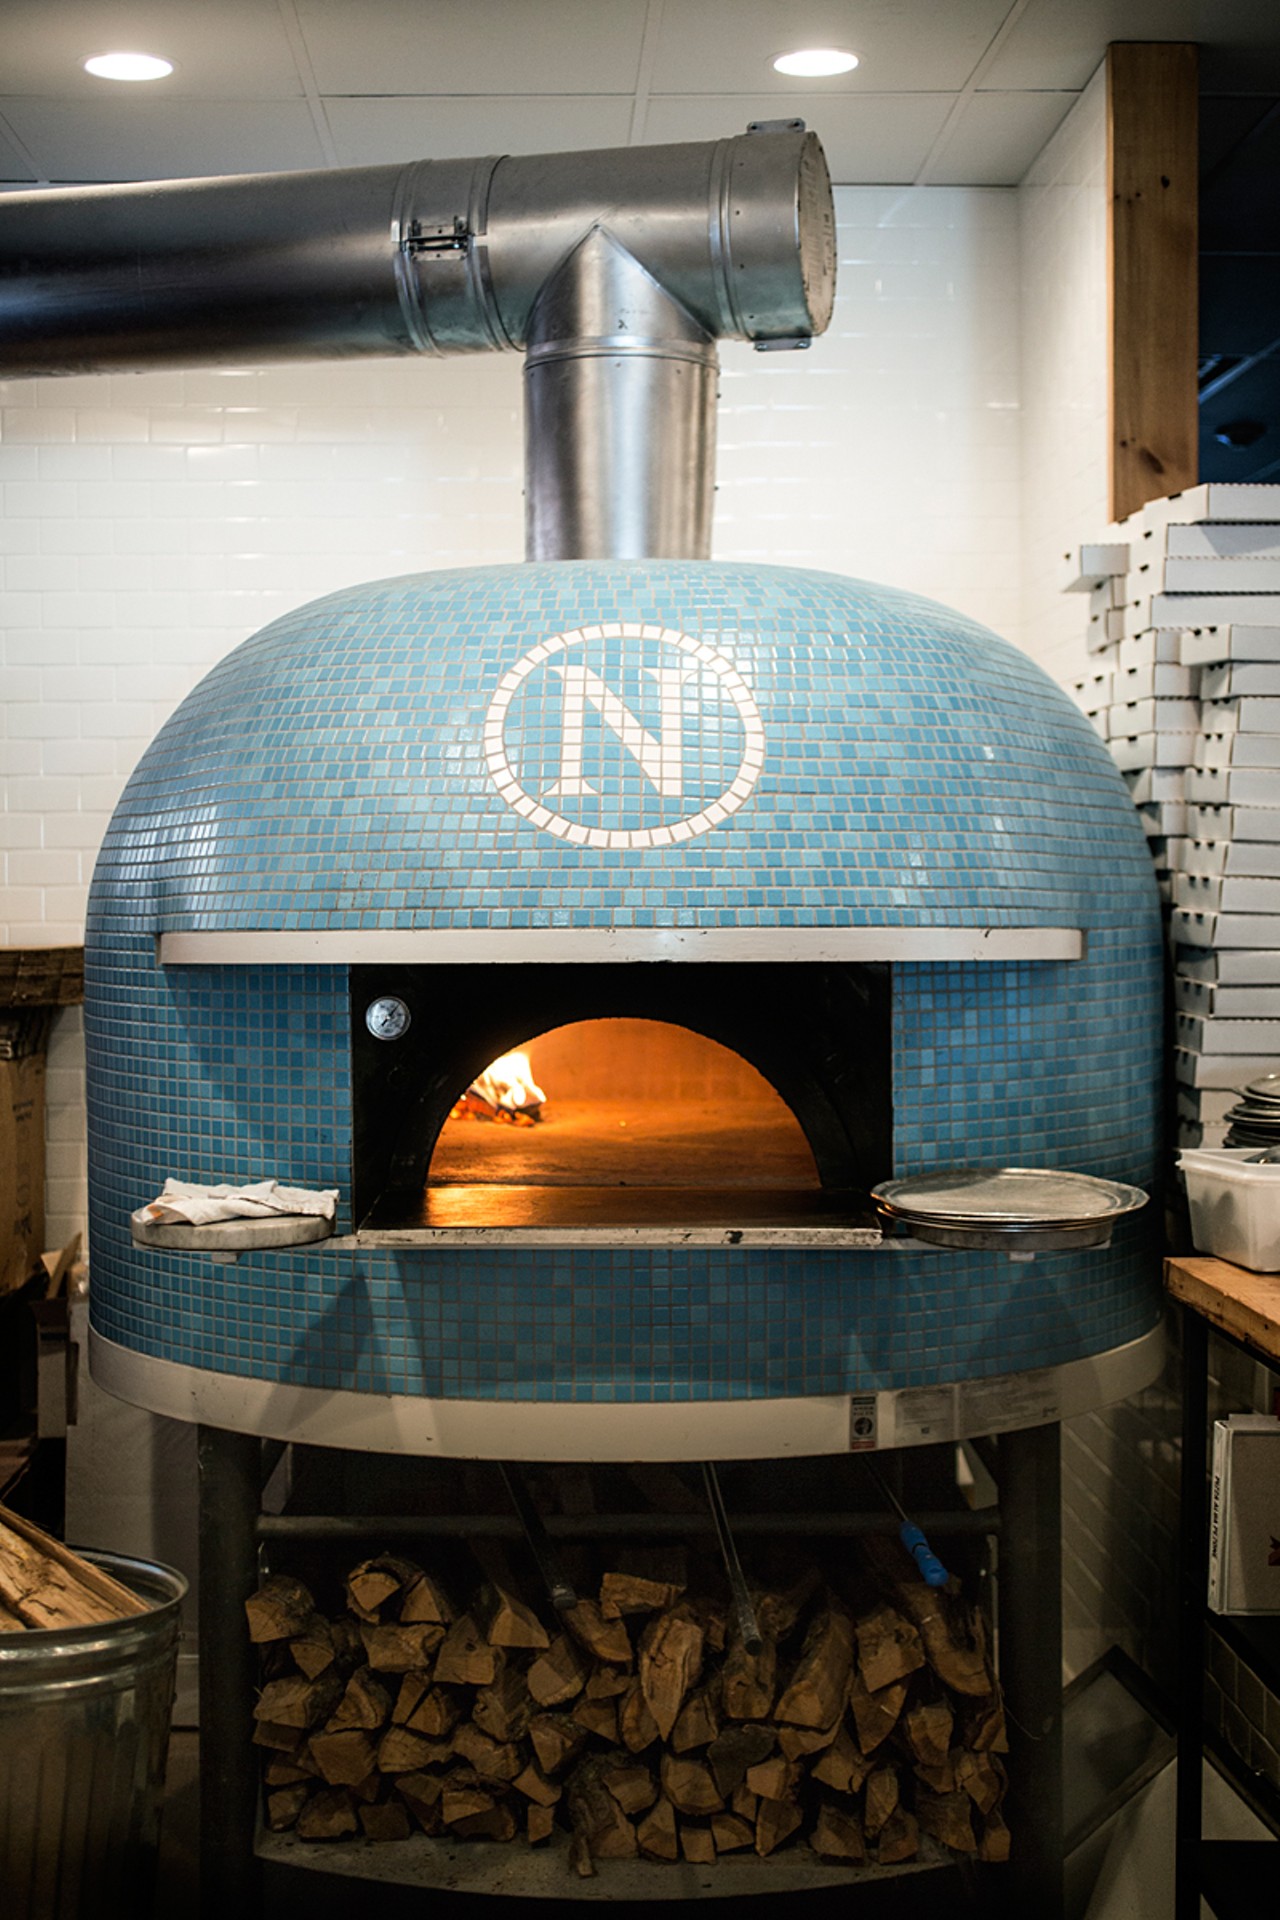 The Good Pie's imported brick pizza oven.